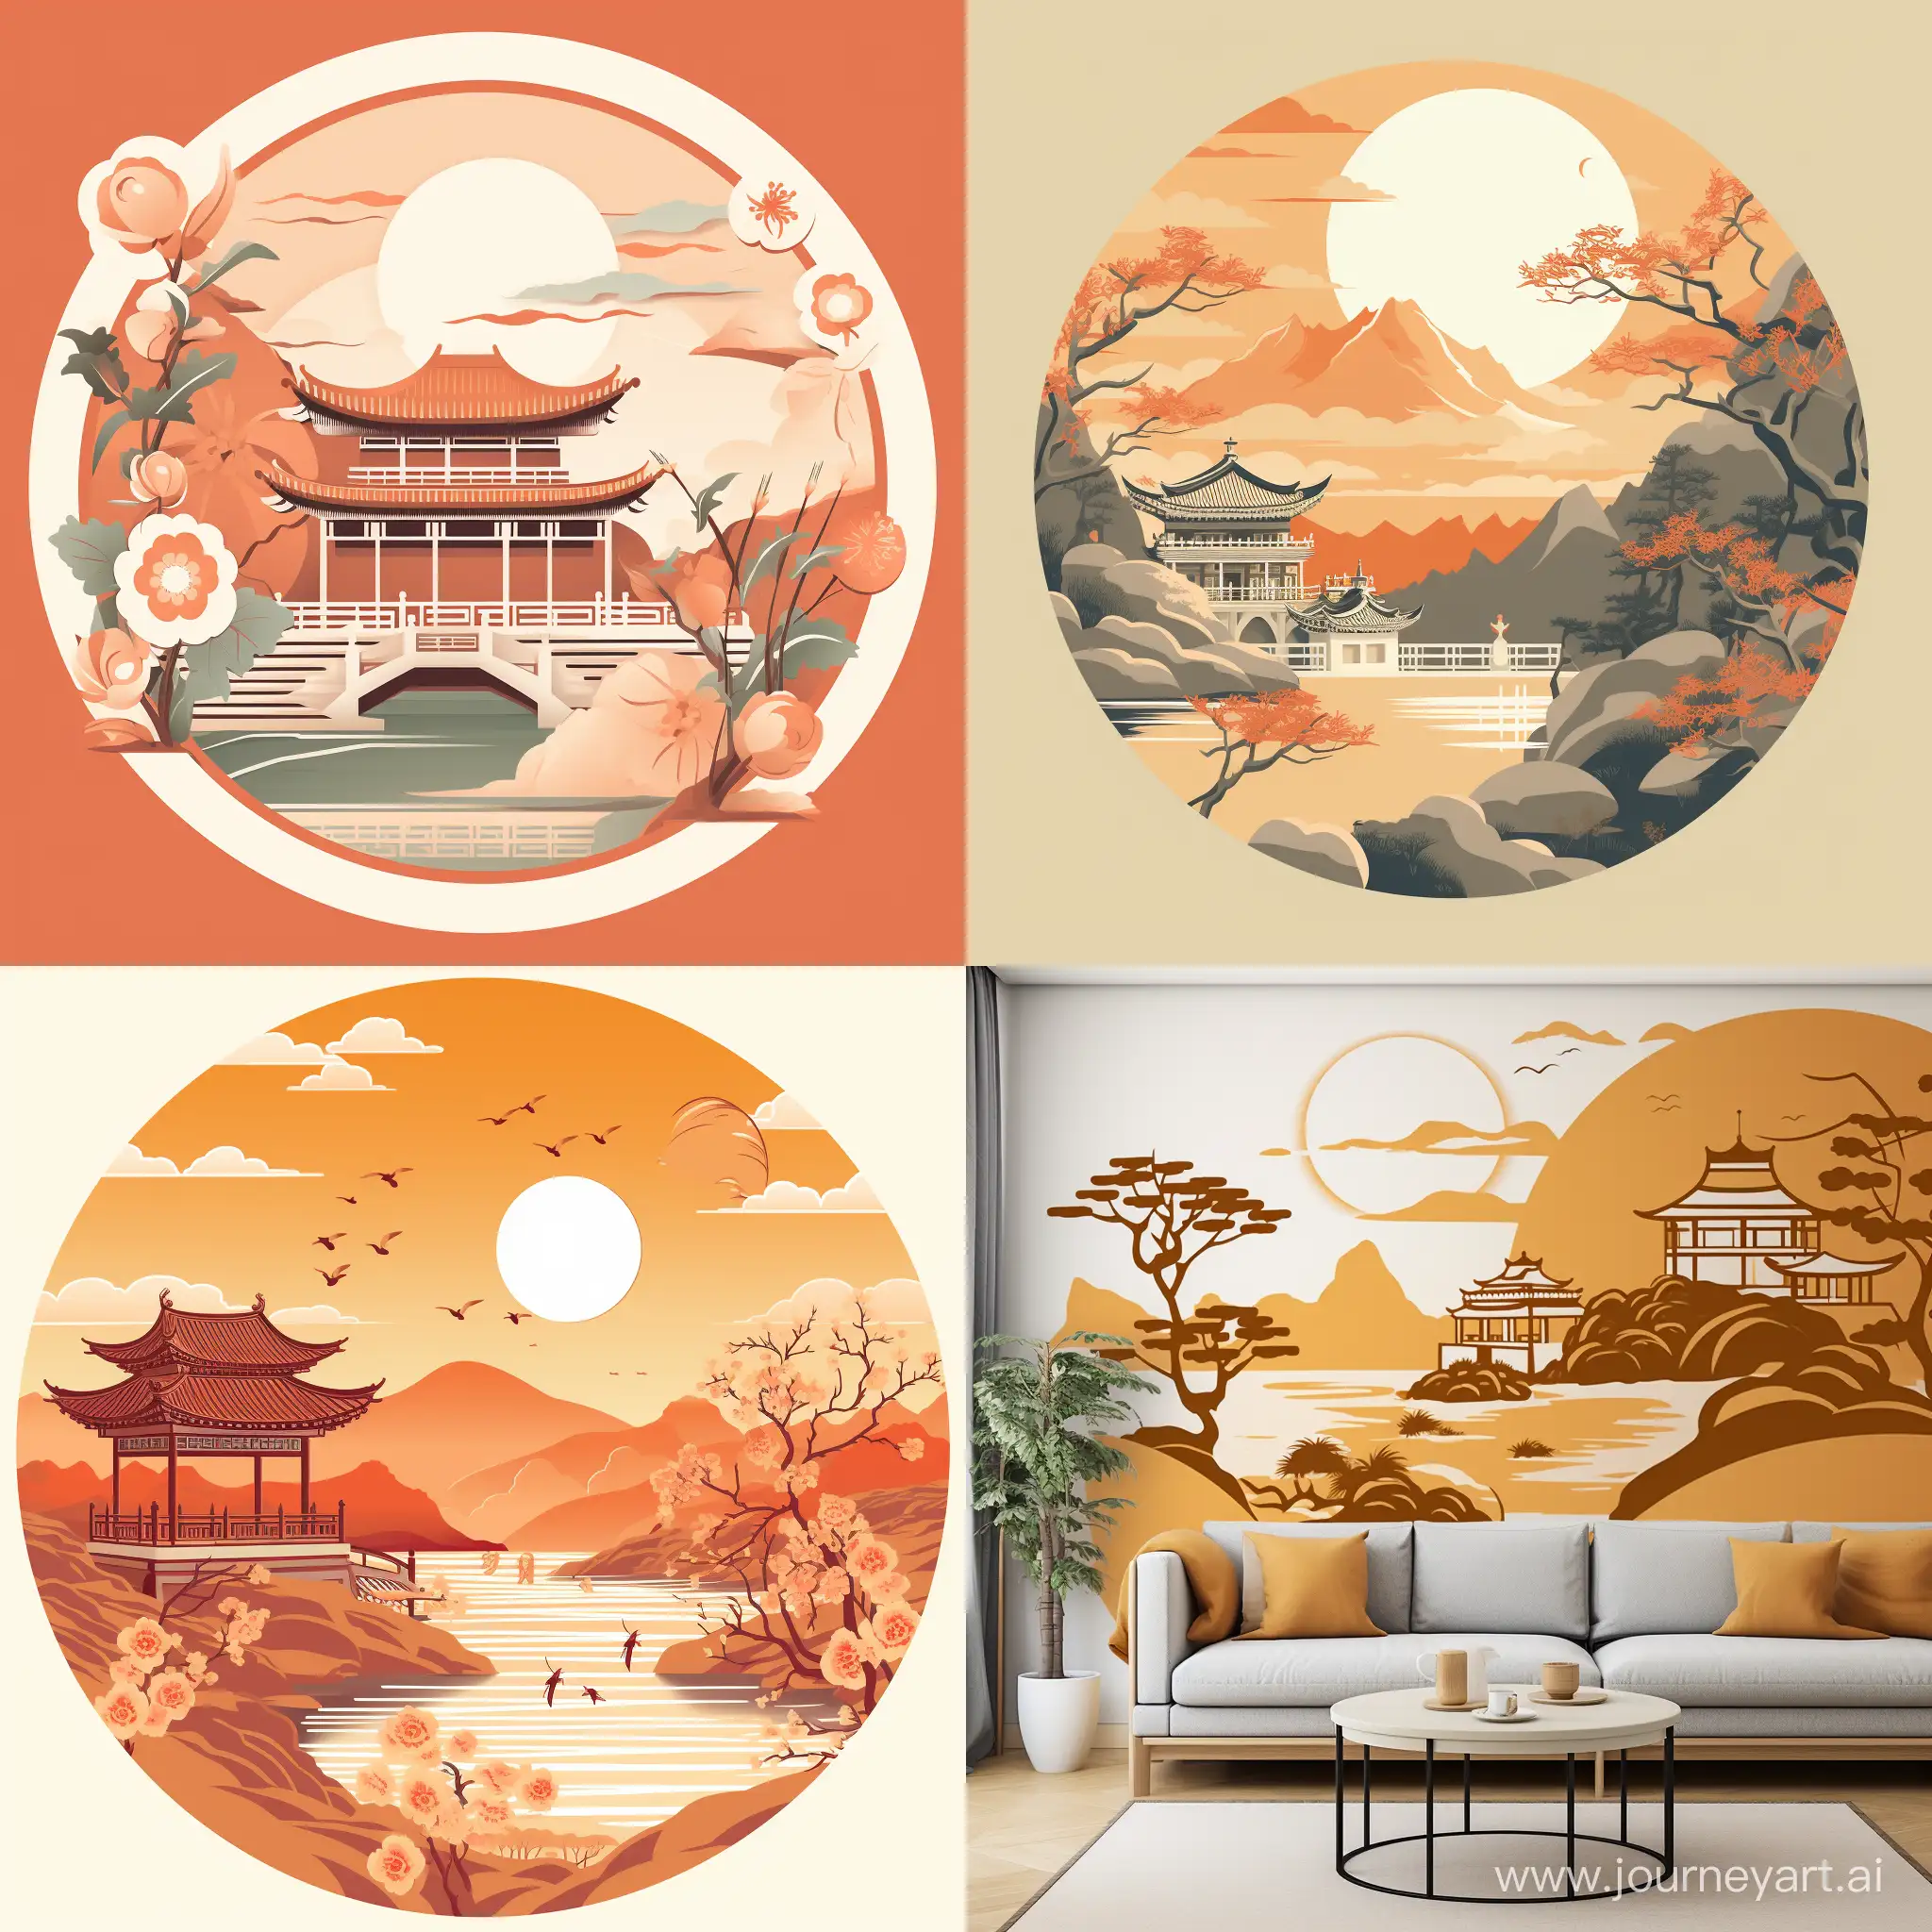 Ancient-Chinese-Landscape-Logo-with-Historical-Breeze-Elegance